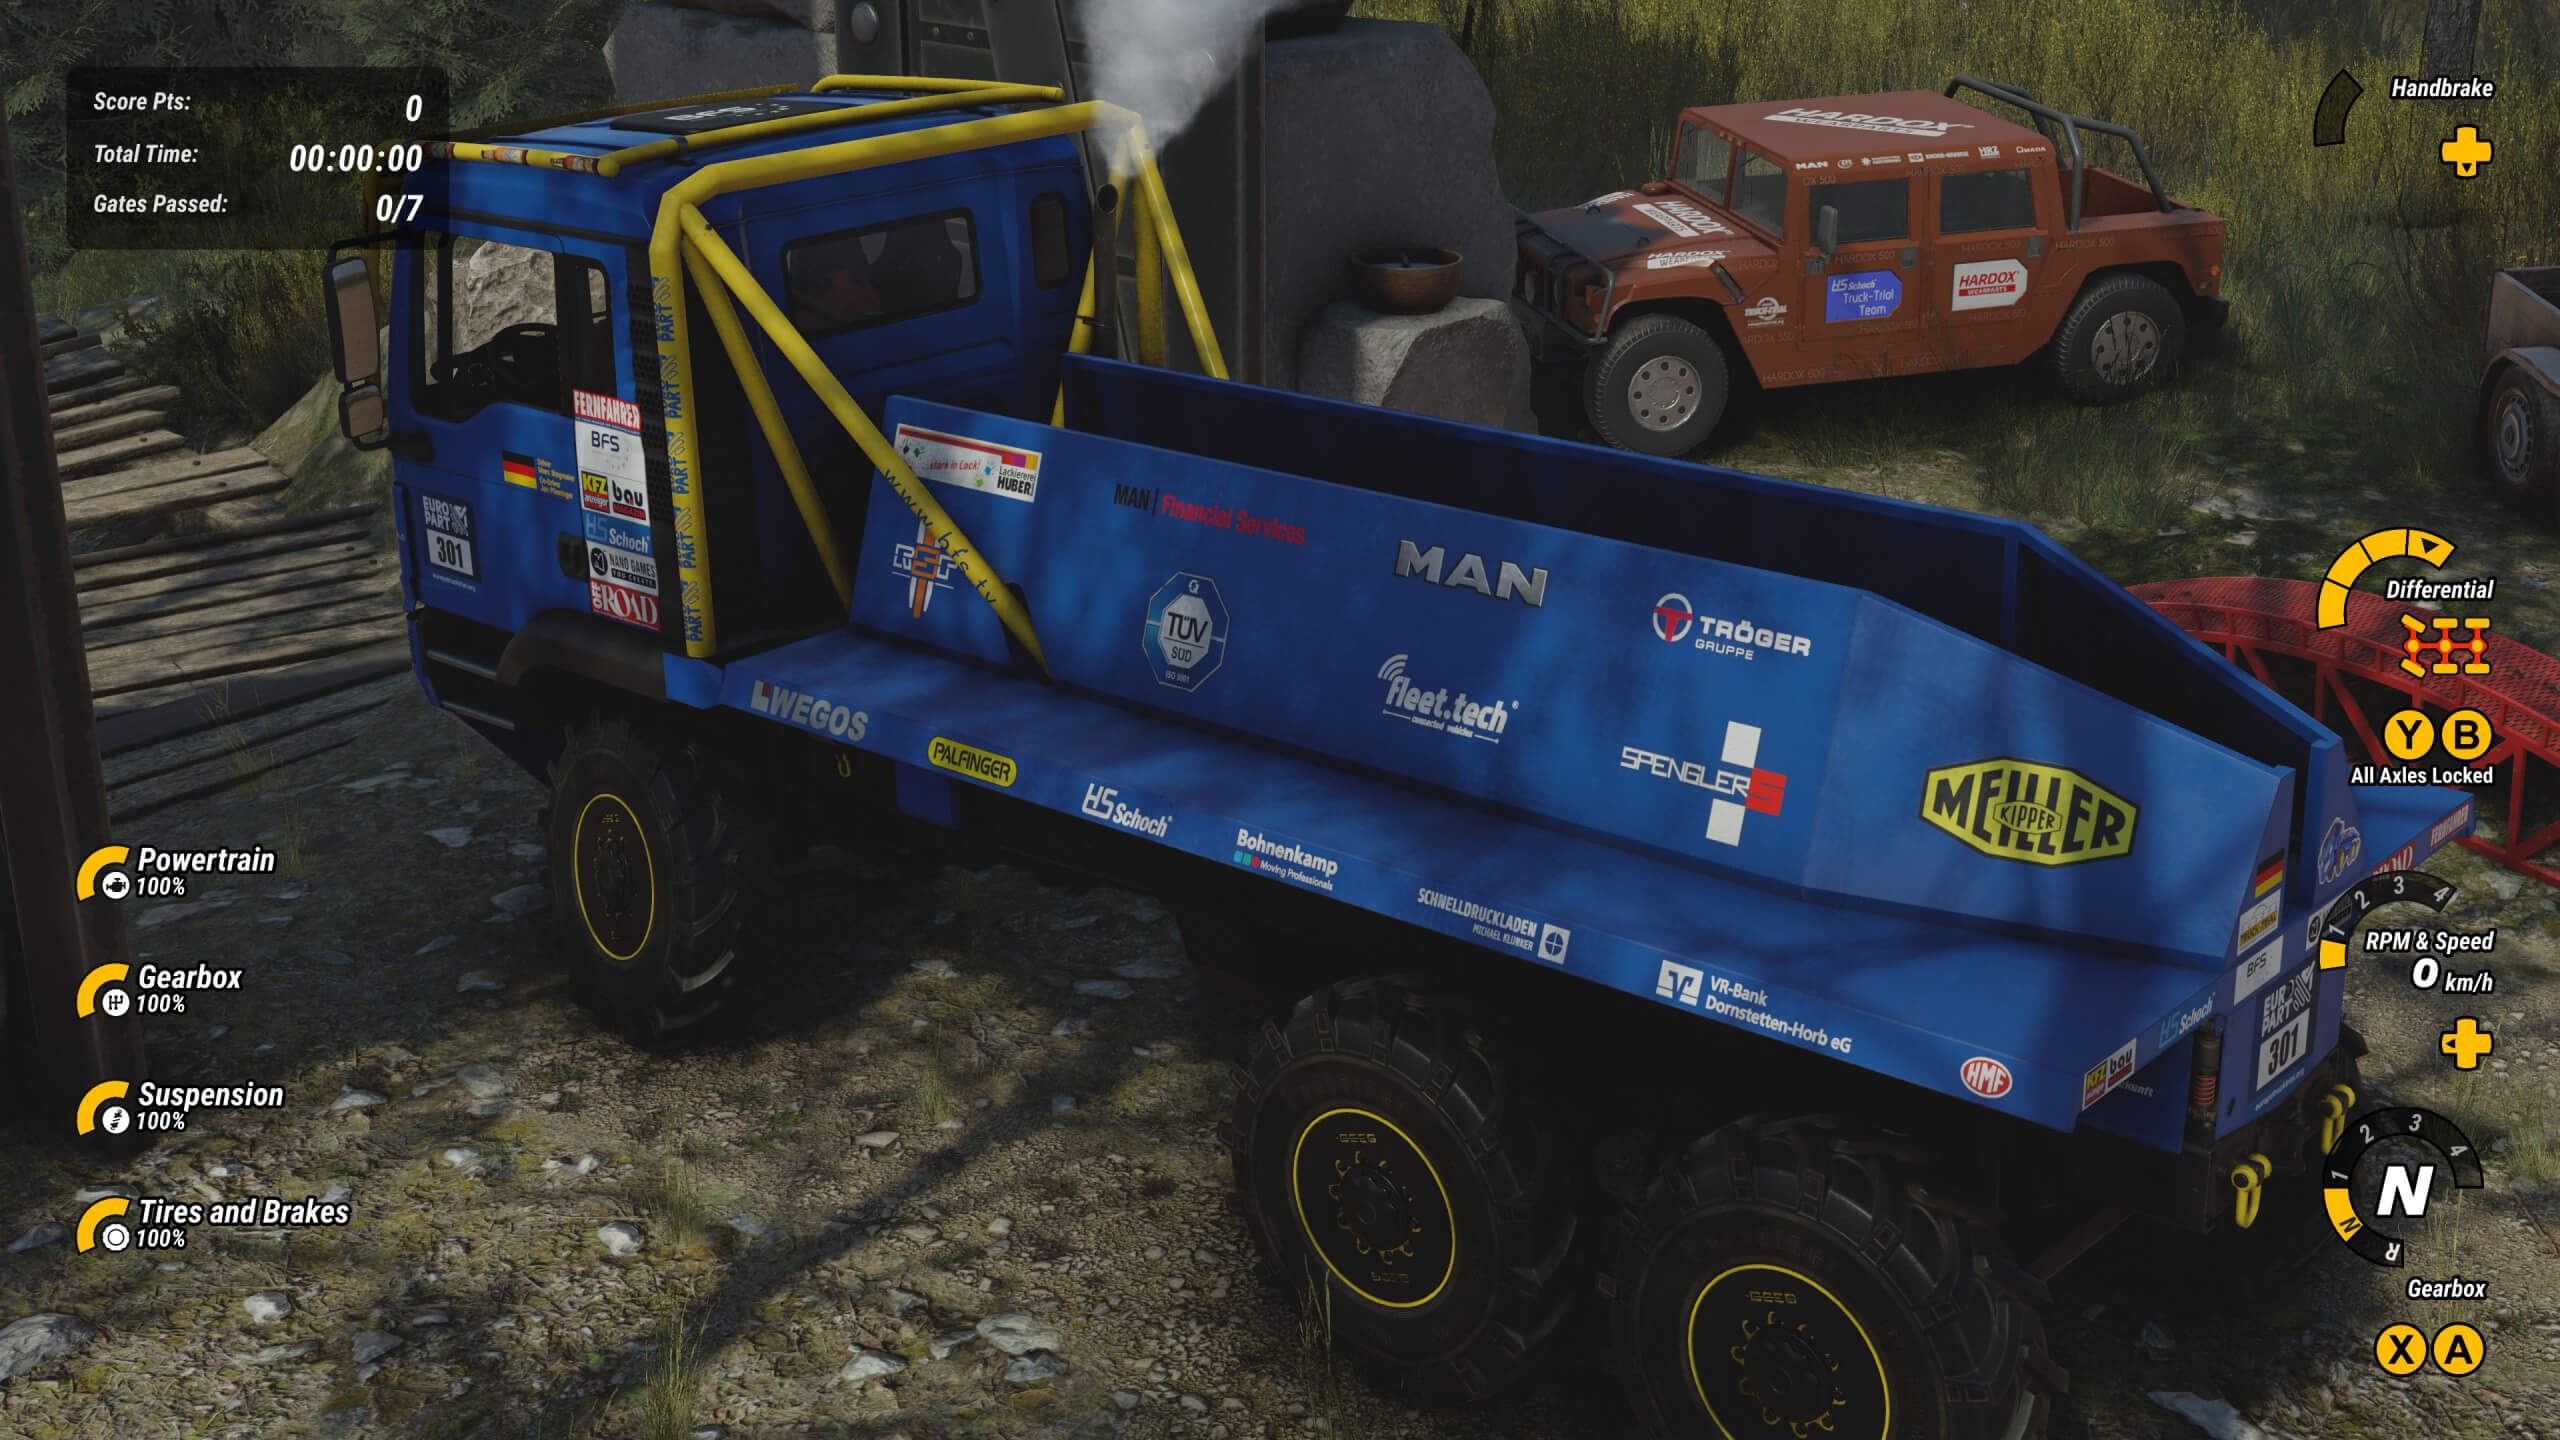 A blue heavy duty 3-axle truck is shown at the starting area of a challenge course. The area around it is rocky. Status of different truck parts are displayed down the left side of the screen while RPM/gears and axle settings are along the right.